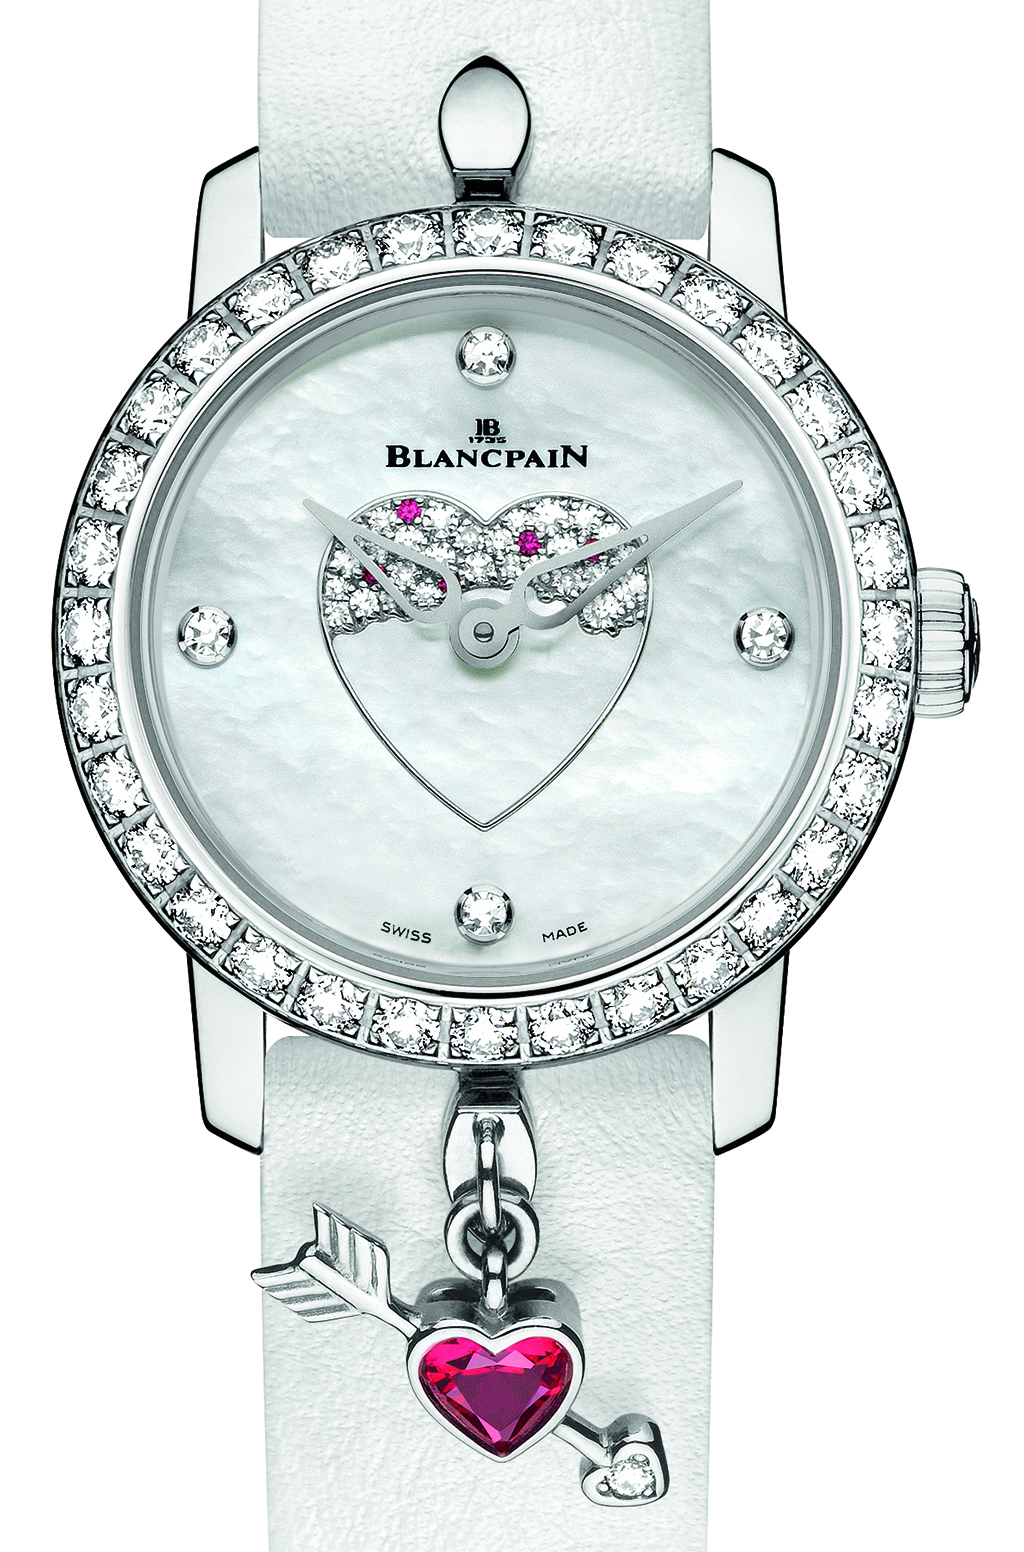 The mother of pearl dial on the Saint-Valentin 2016 Blancpain Ladybird. 